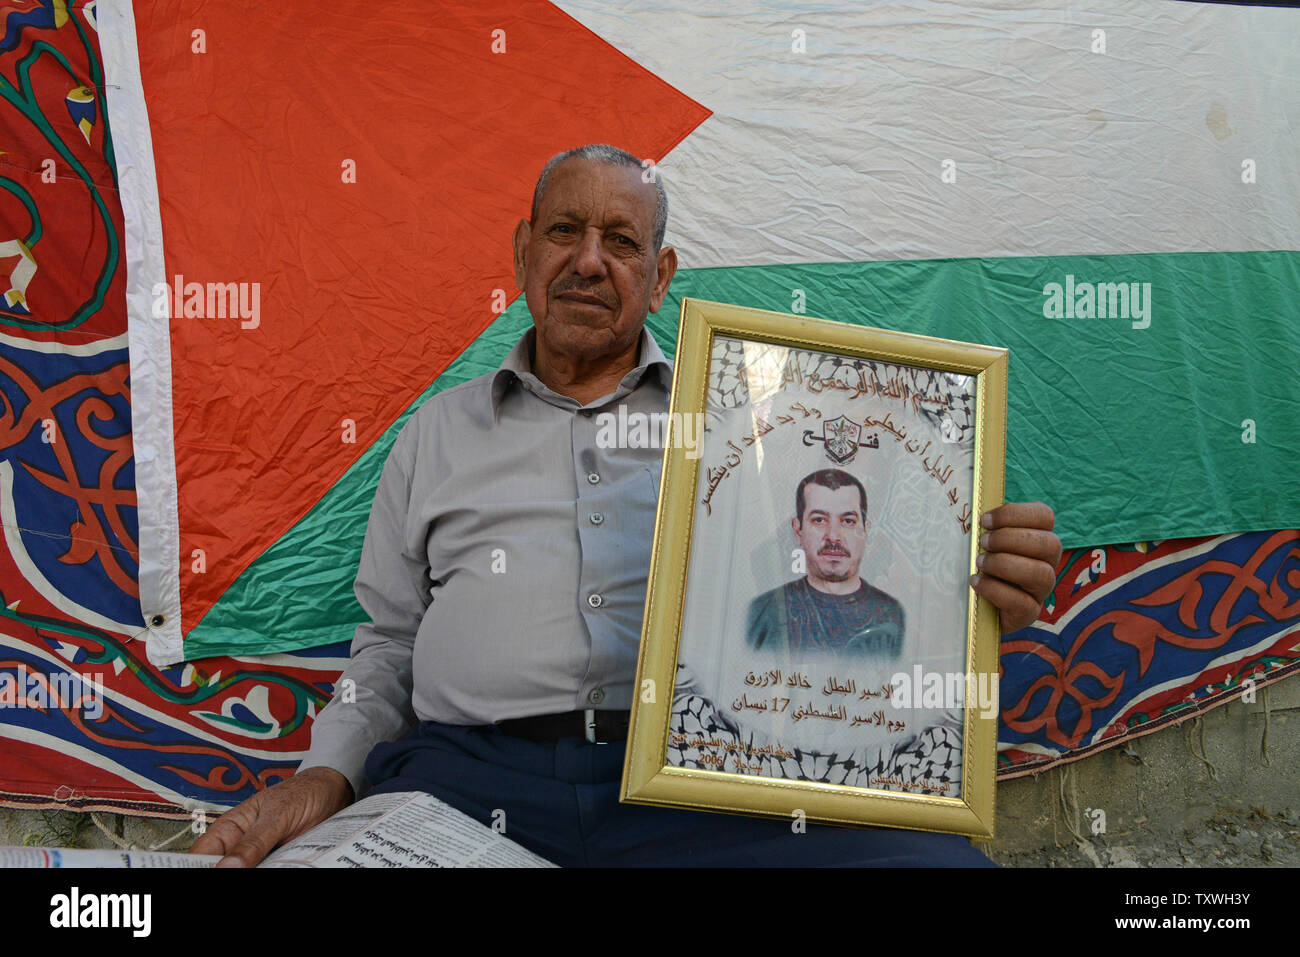 Daoud Azraz holds a photo of his son, Palestinian prisoner Khaled Azraq, who is set to be released from Israeli prison, in his home in the Aida Refugee Camp in Bethlehem, West Bank, October 29, 2013. Azraq, 48 years, has served 24 years in Israeli prison for murdering an Israeli in 1991. He is one of  26 Palestinian prisoners slated for release who killed 30 Israelis prior to the 1993 Oslo Accords.  UPI/Debbie Hill Stock Photo